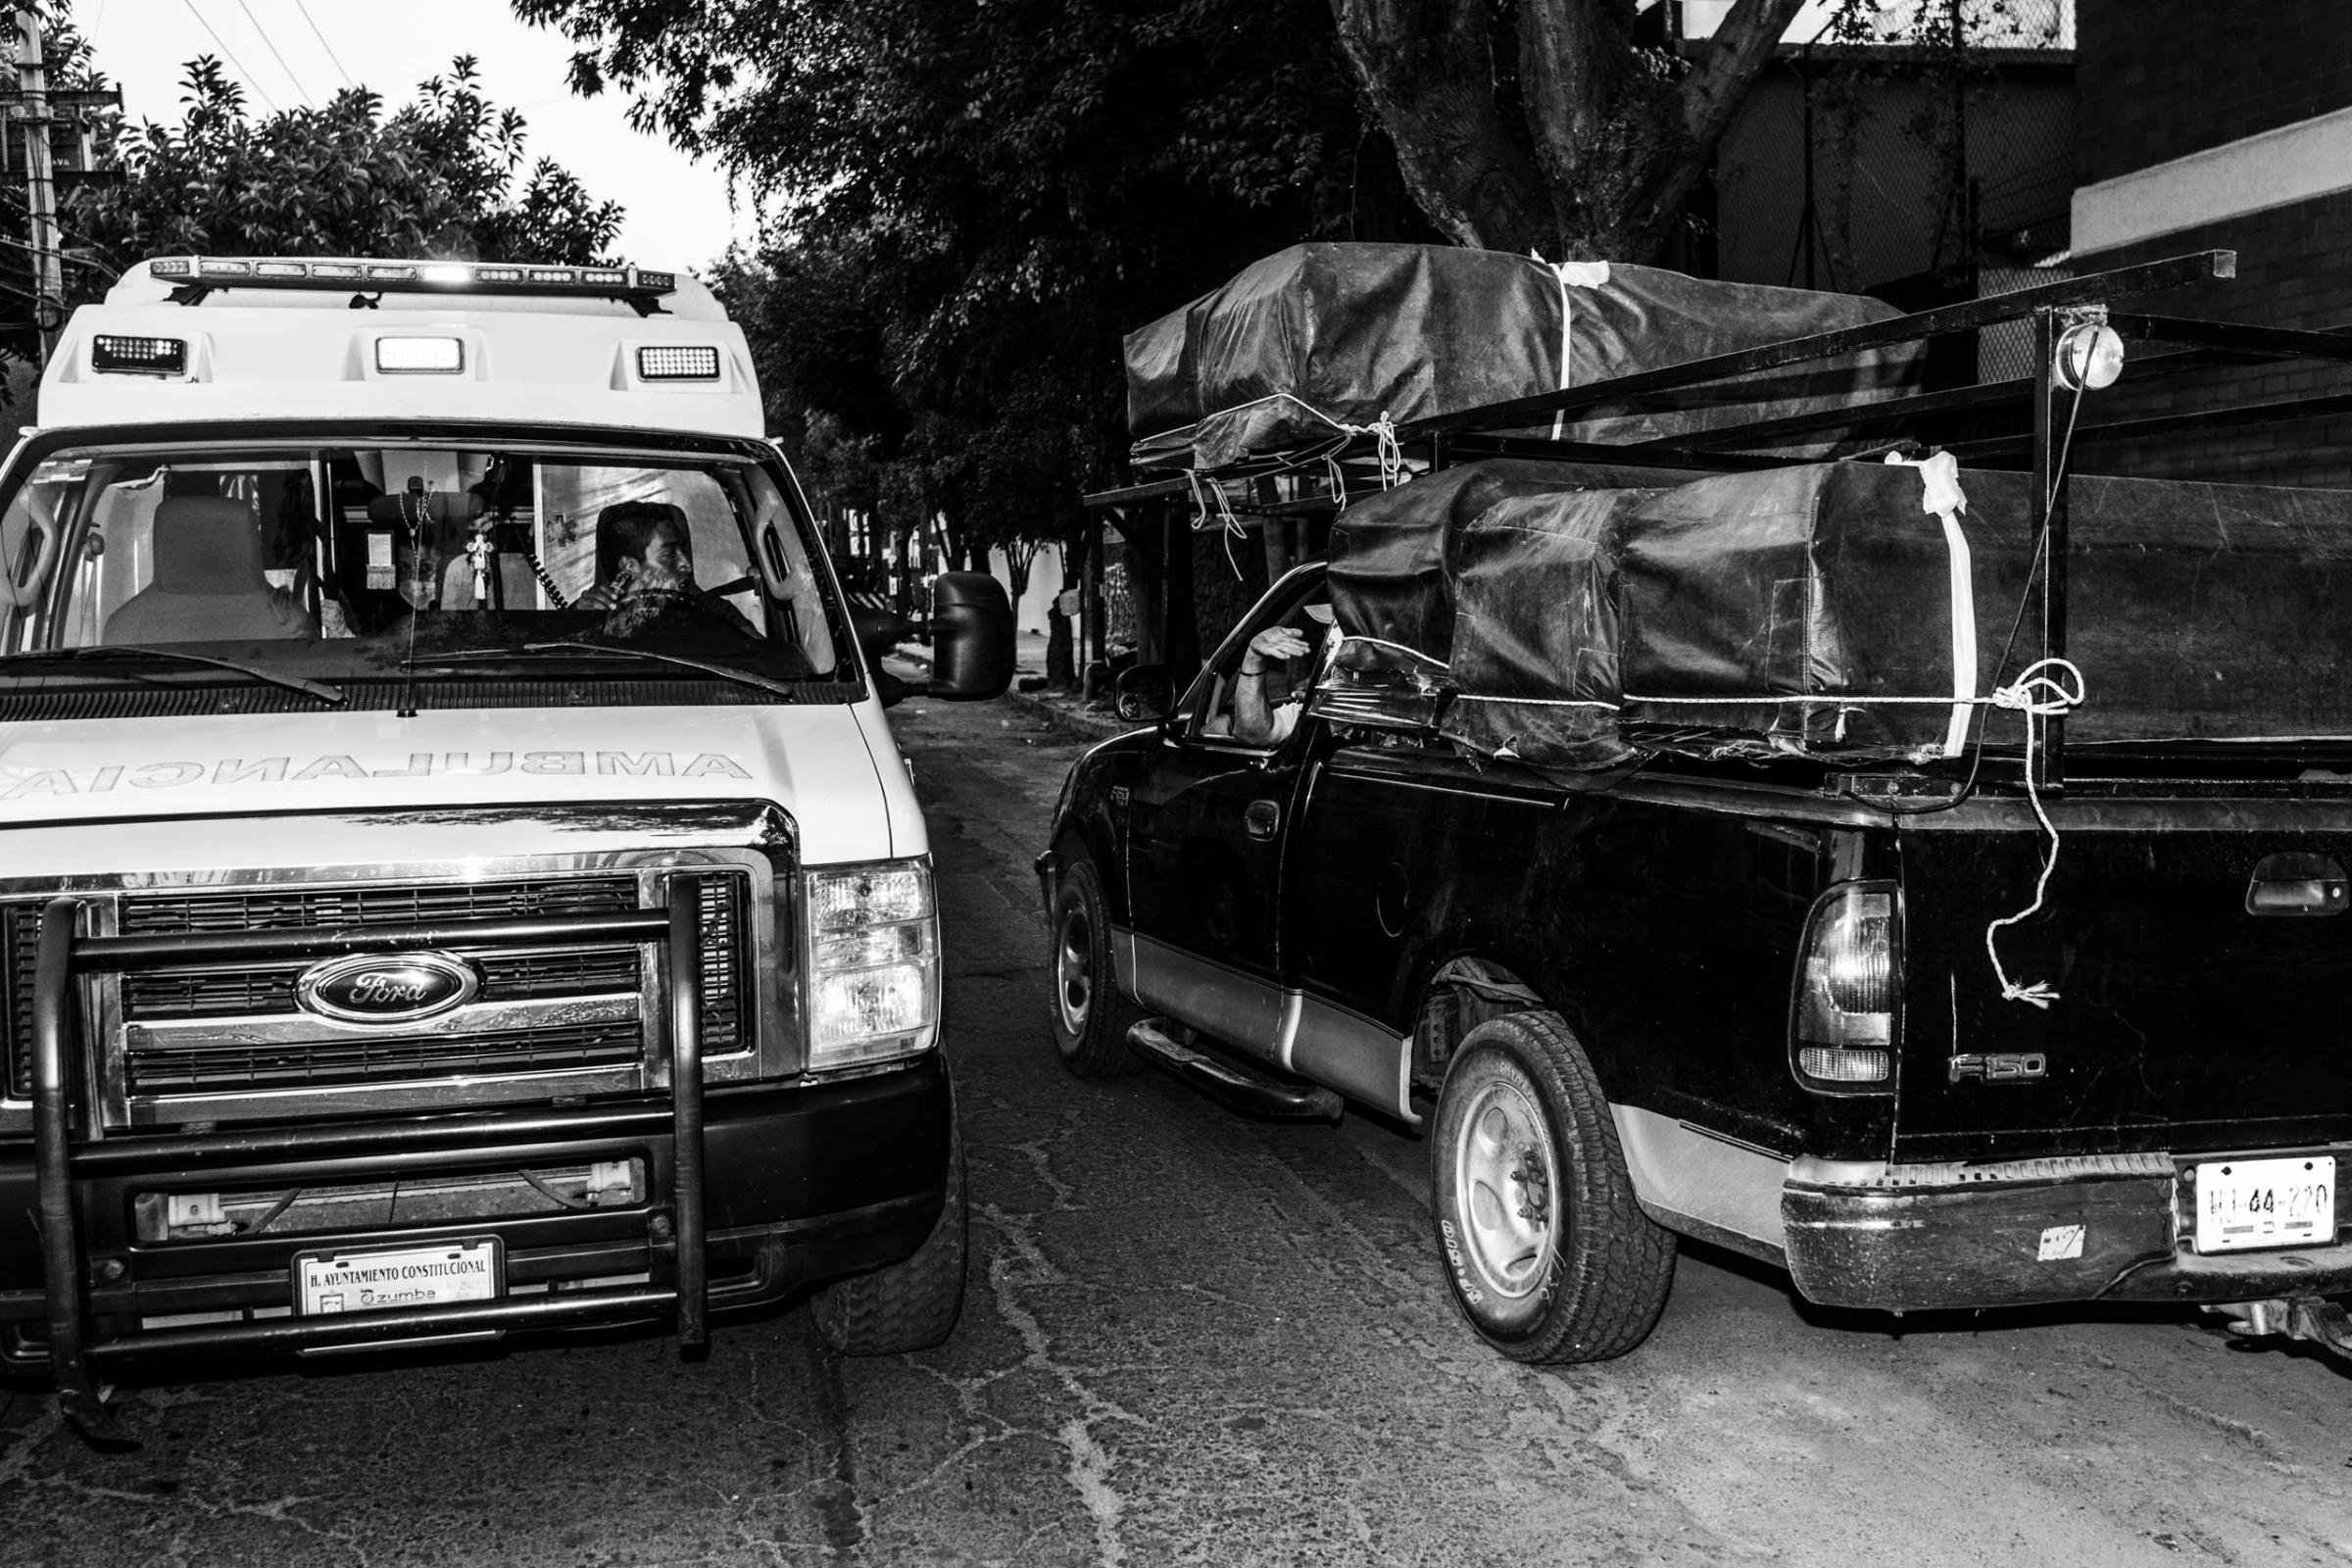 Itinerant coffins sellers are talking to an ambulance in order to gather info about the funerals stores in need of coffins. Mexico City, Colonia Doctores, Mexico on March 13, 2016.